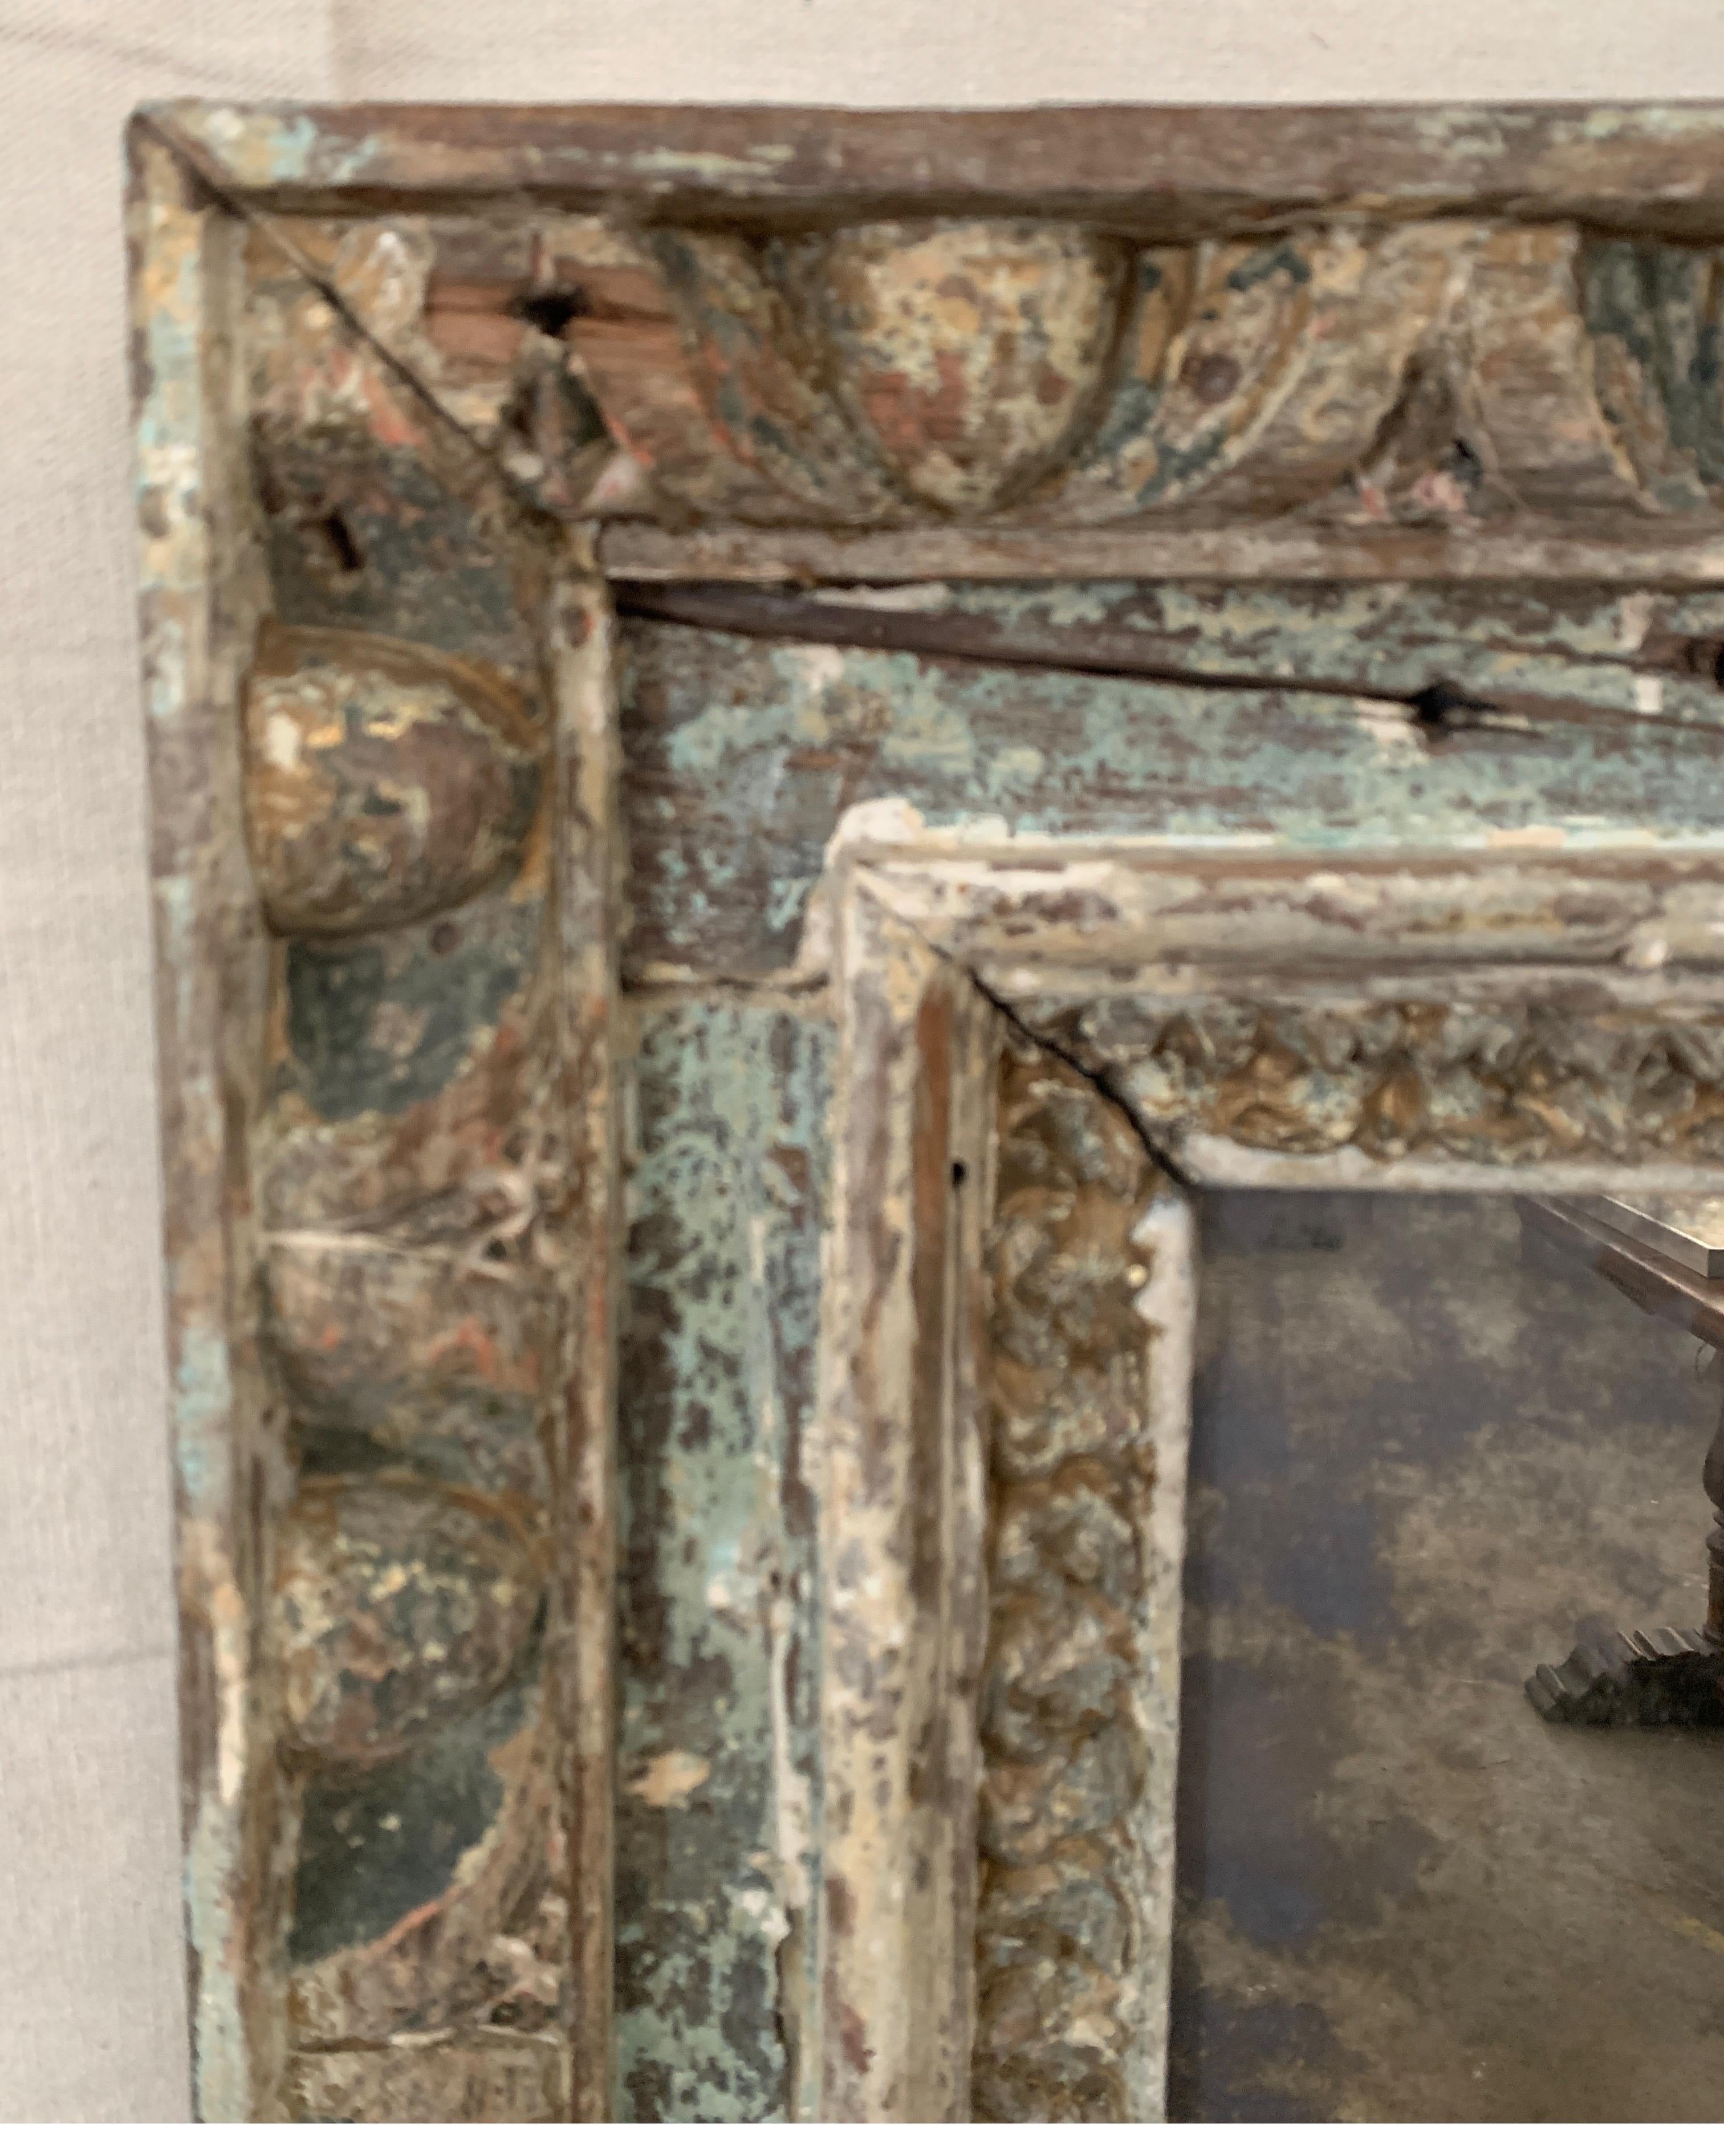 This was likely from a cathedral in Spain. It may have had a painting in it at one time. It has a replace mirror made to look distressed and old now.